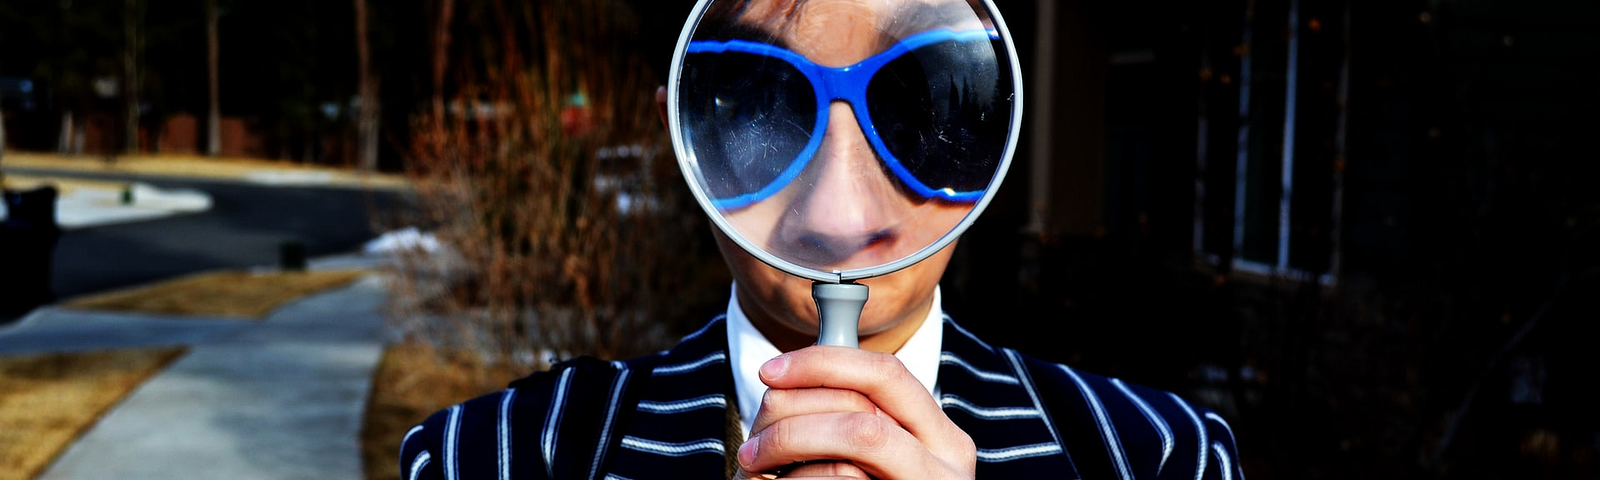 a person wearing a striped suit with a magnifying glass in front of their face magnifying their eyes covered with sunglasses